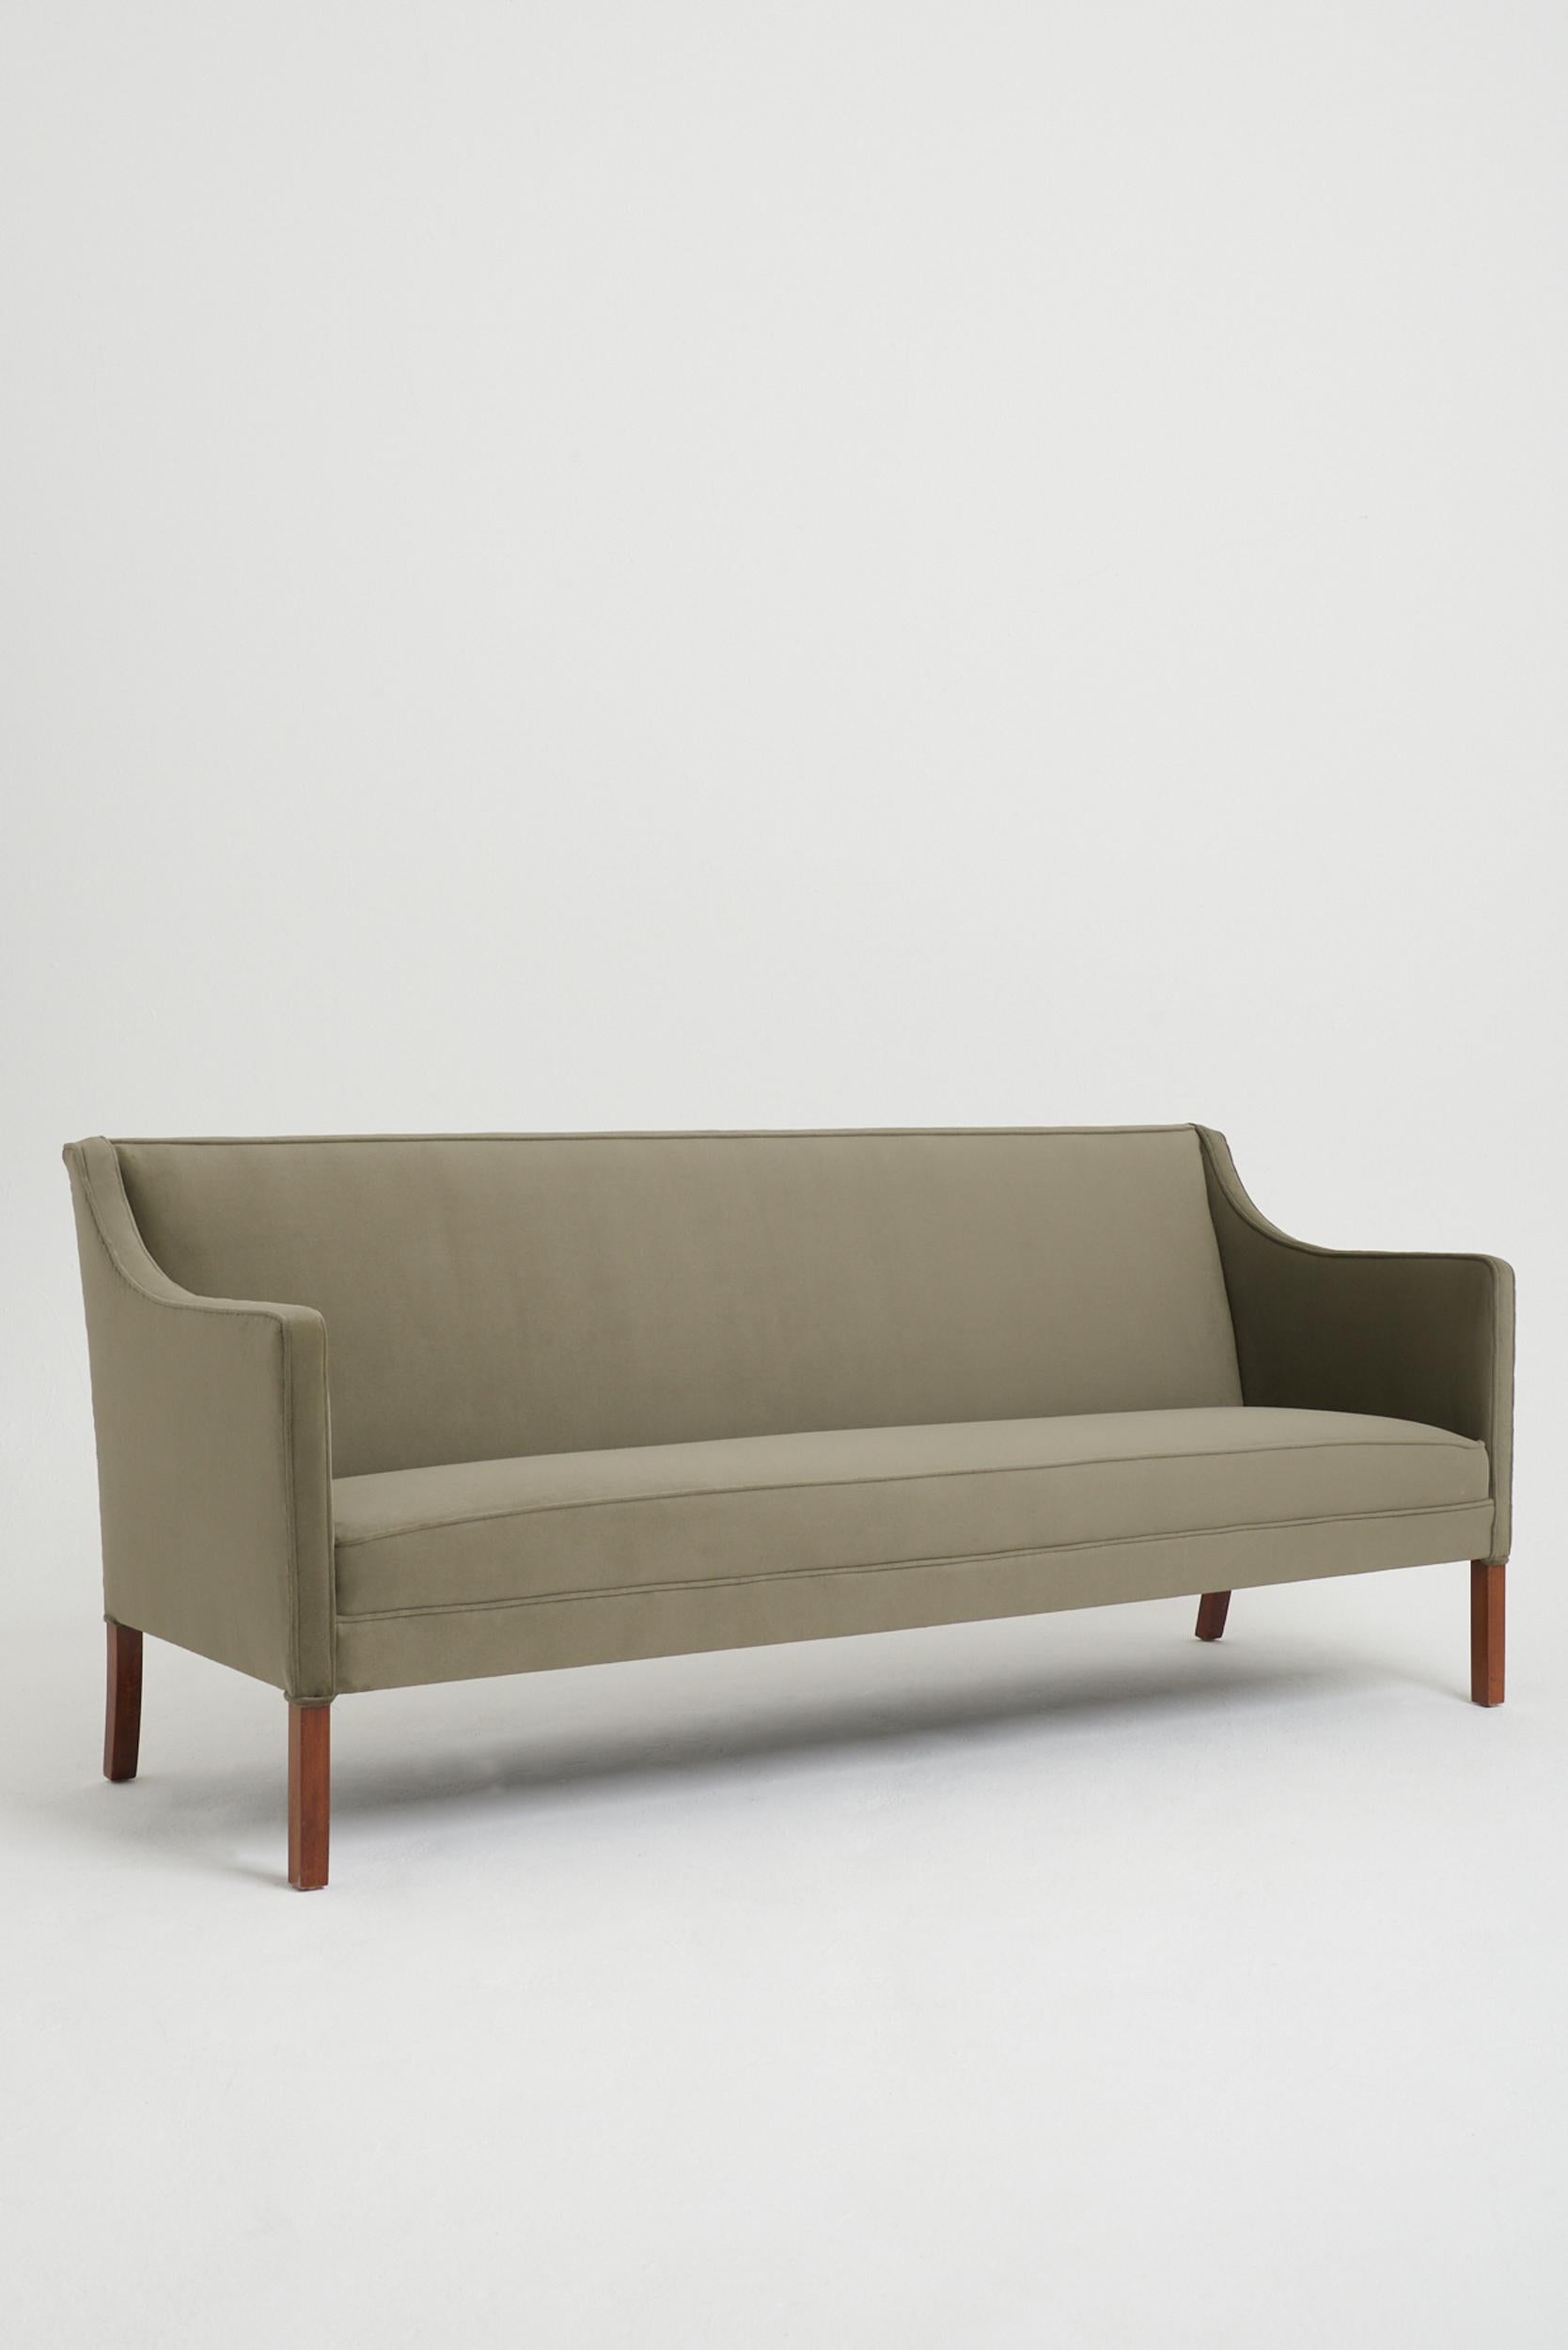 A mahogany sofa by Jacob Kjær (1896-1957).
Upholstered in Perennials velvet. 
Denmark, Circa 1940.
87 cm high by 203 cm wide by 70 cm depth, seat height 45 cm.